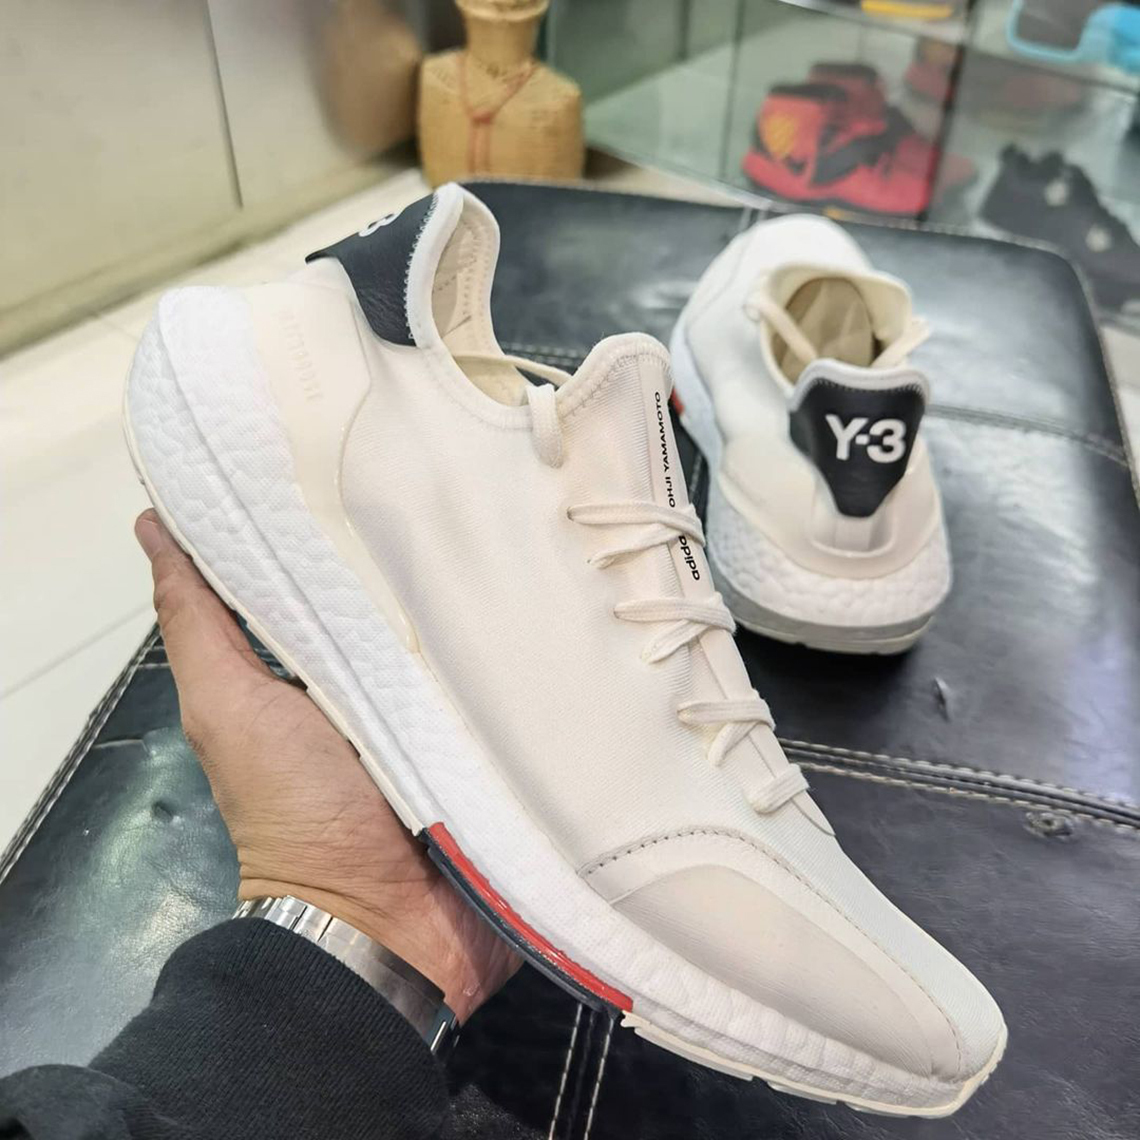 grinning dictionary combination First Look at the adidas Y-3 Ultraboost 21